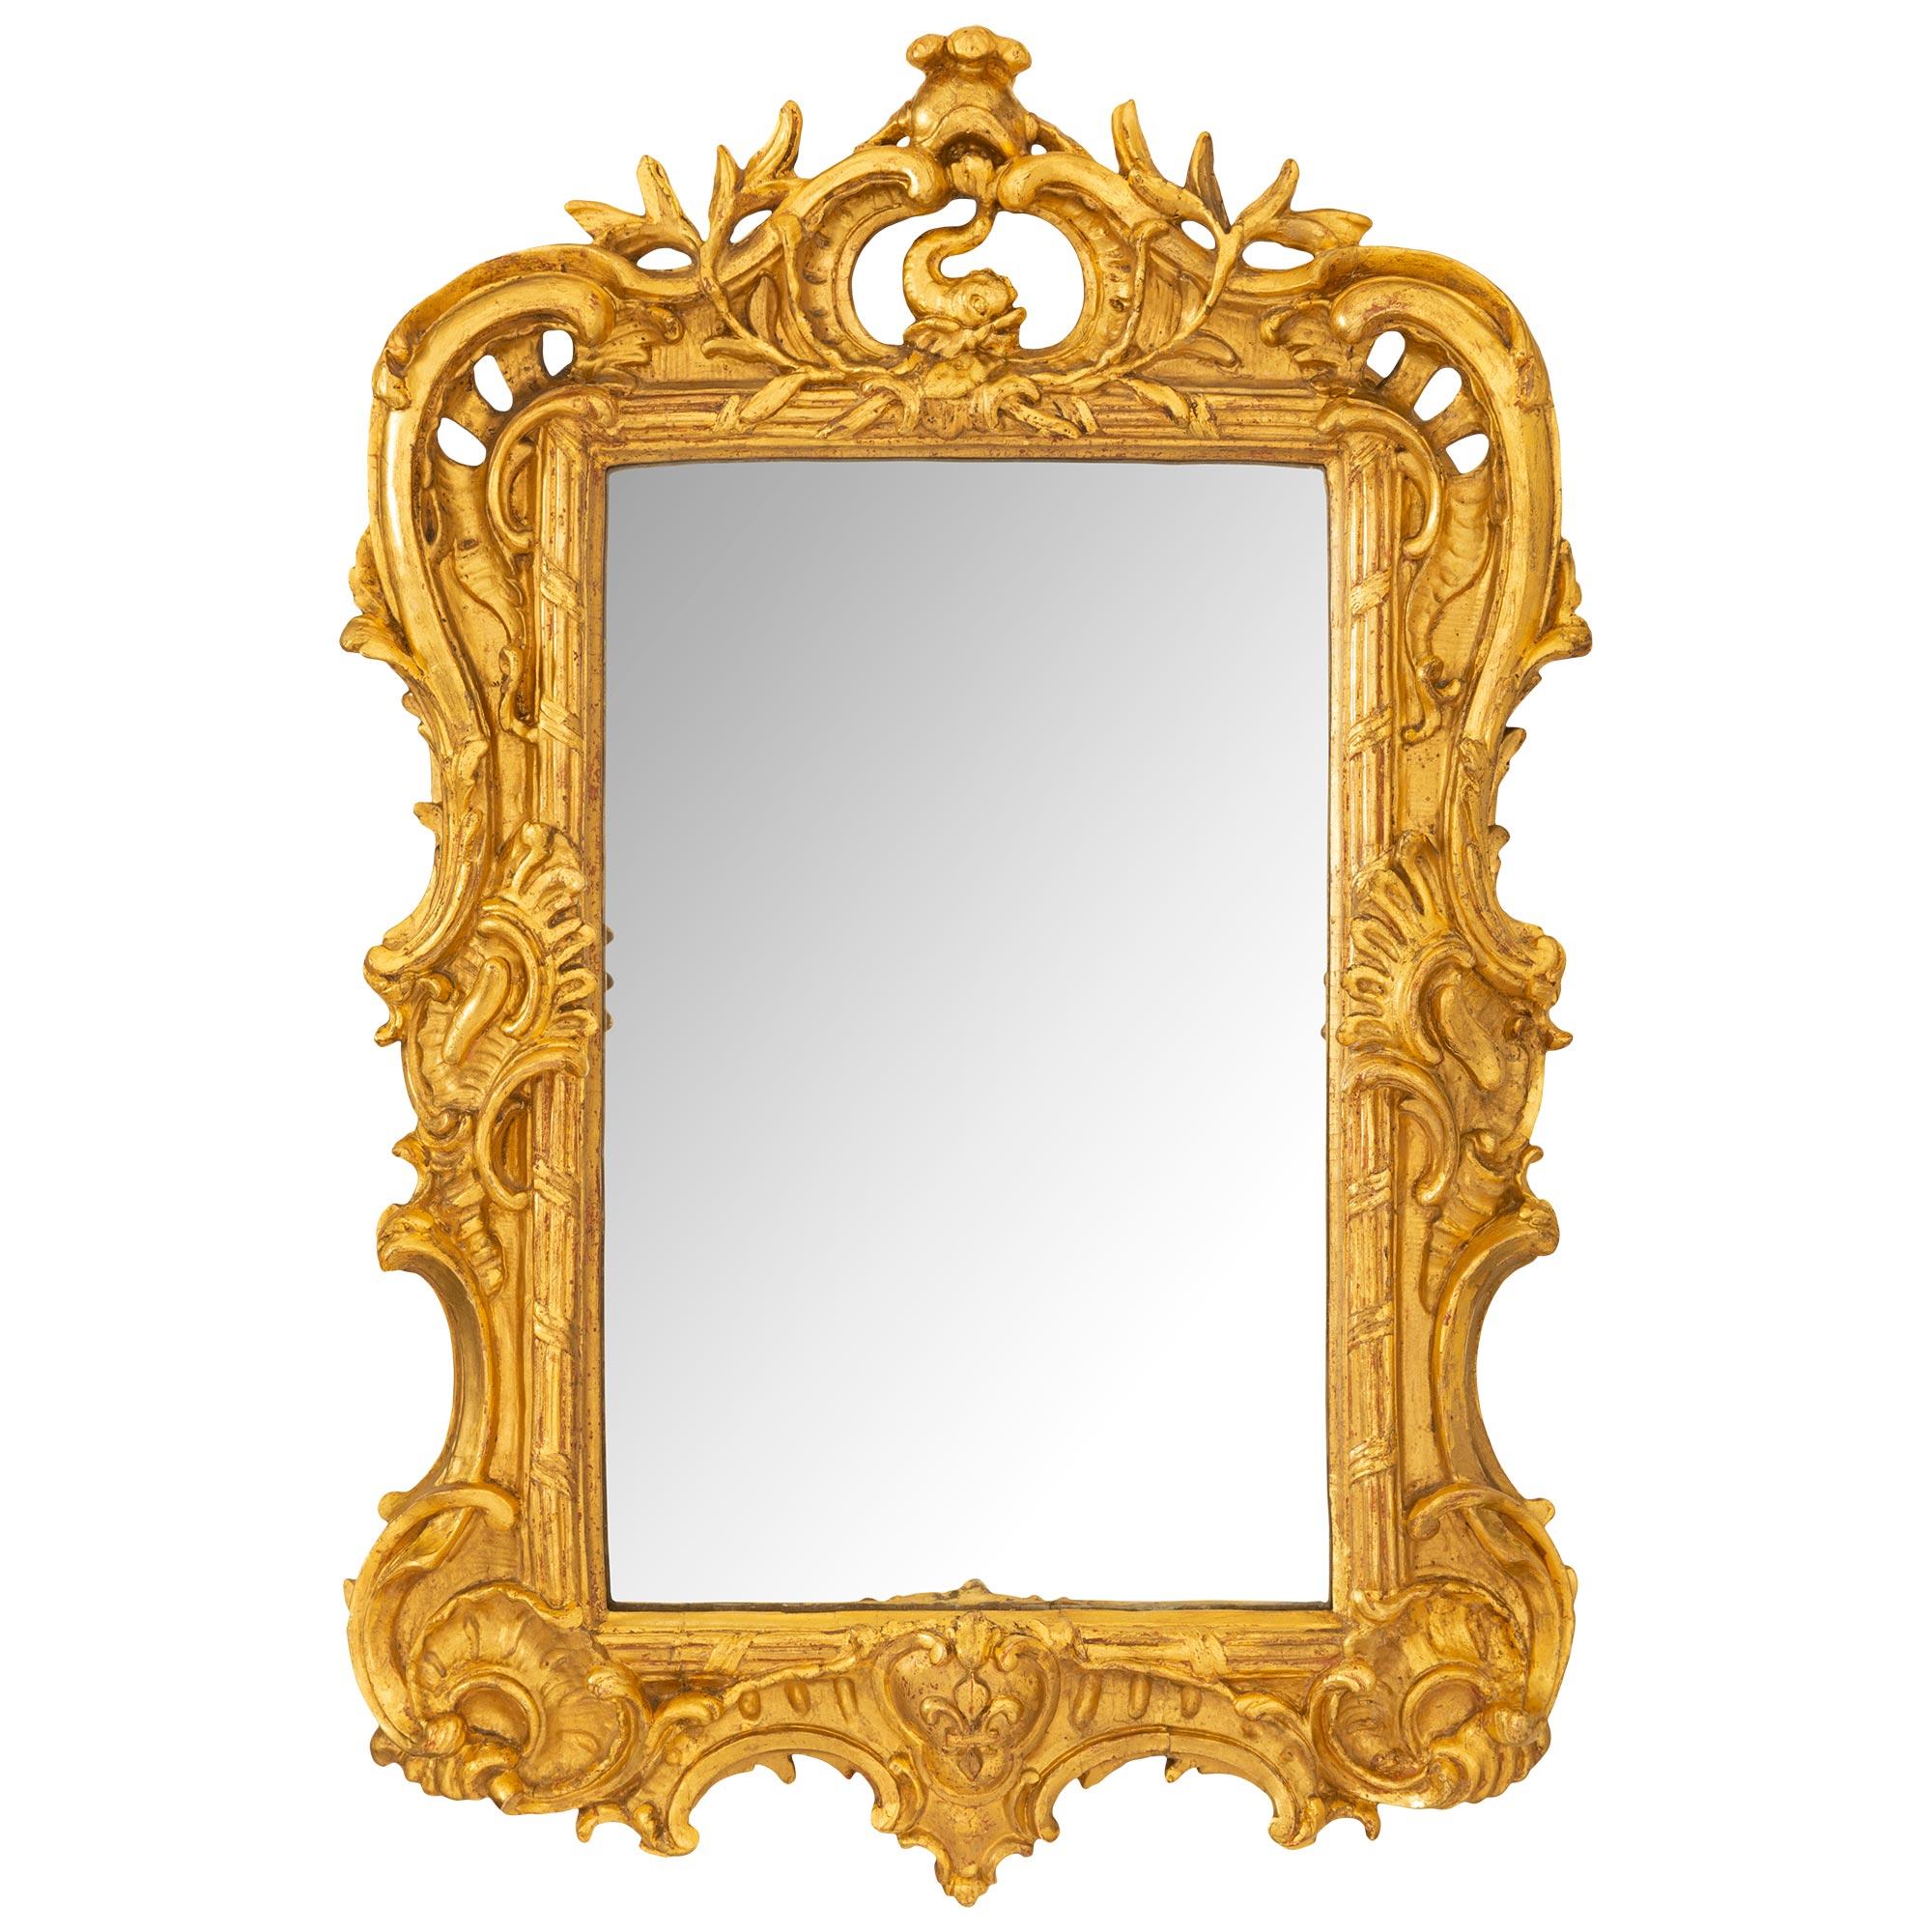 French Mid 18th Century Louis XV Period Giltwood Mirror For Sale 4